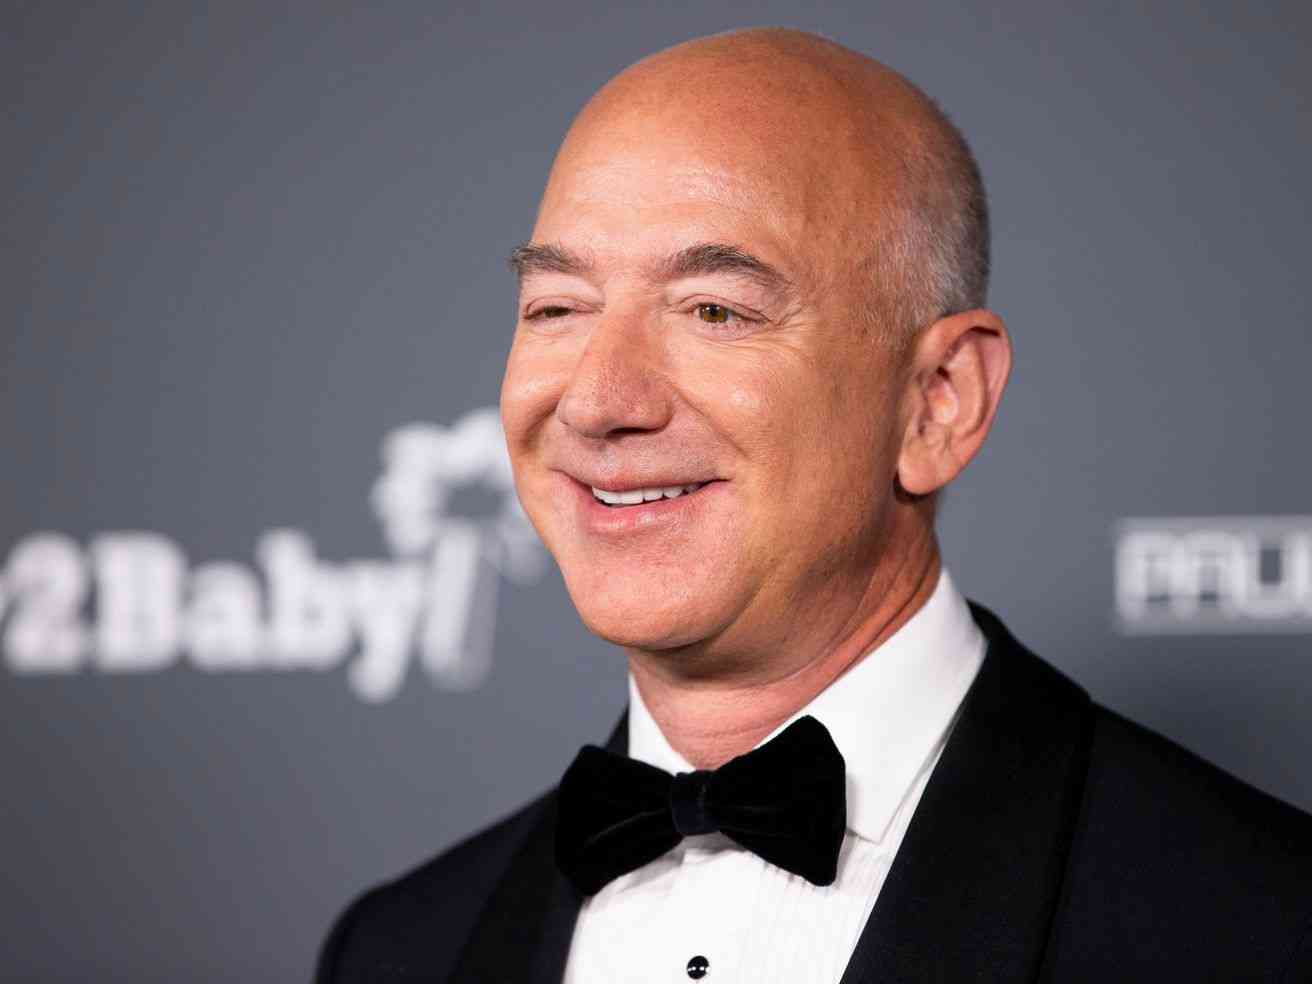 Jeff Bezos also issues US recession warning: 'Let's get ready to take action' book